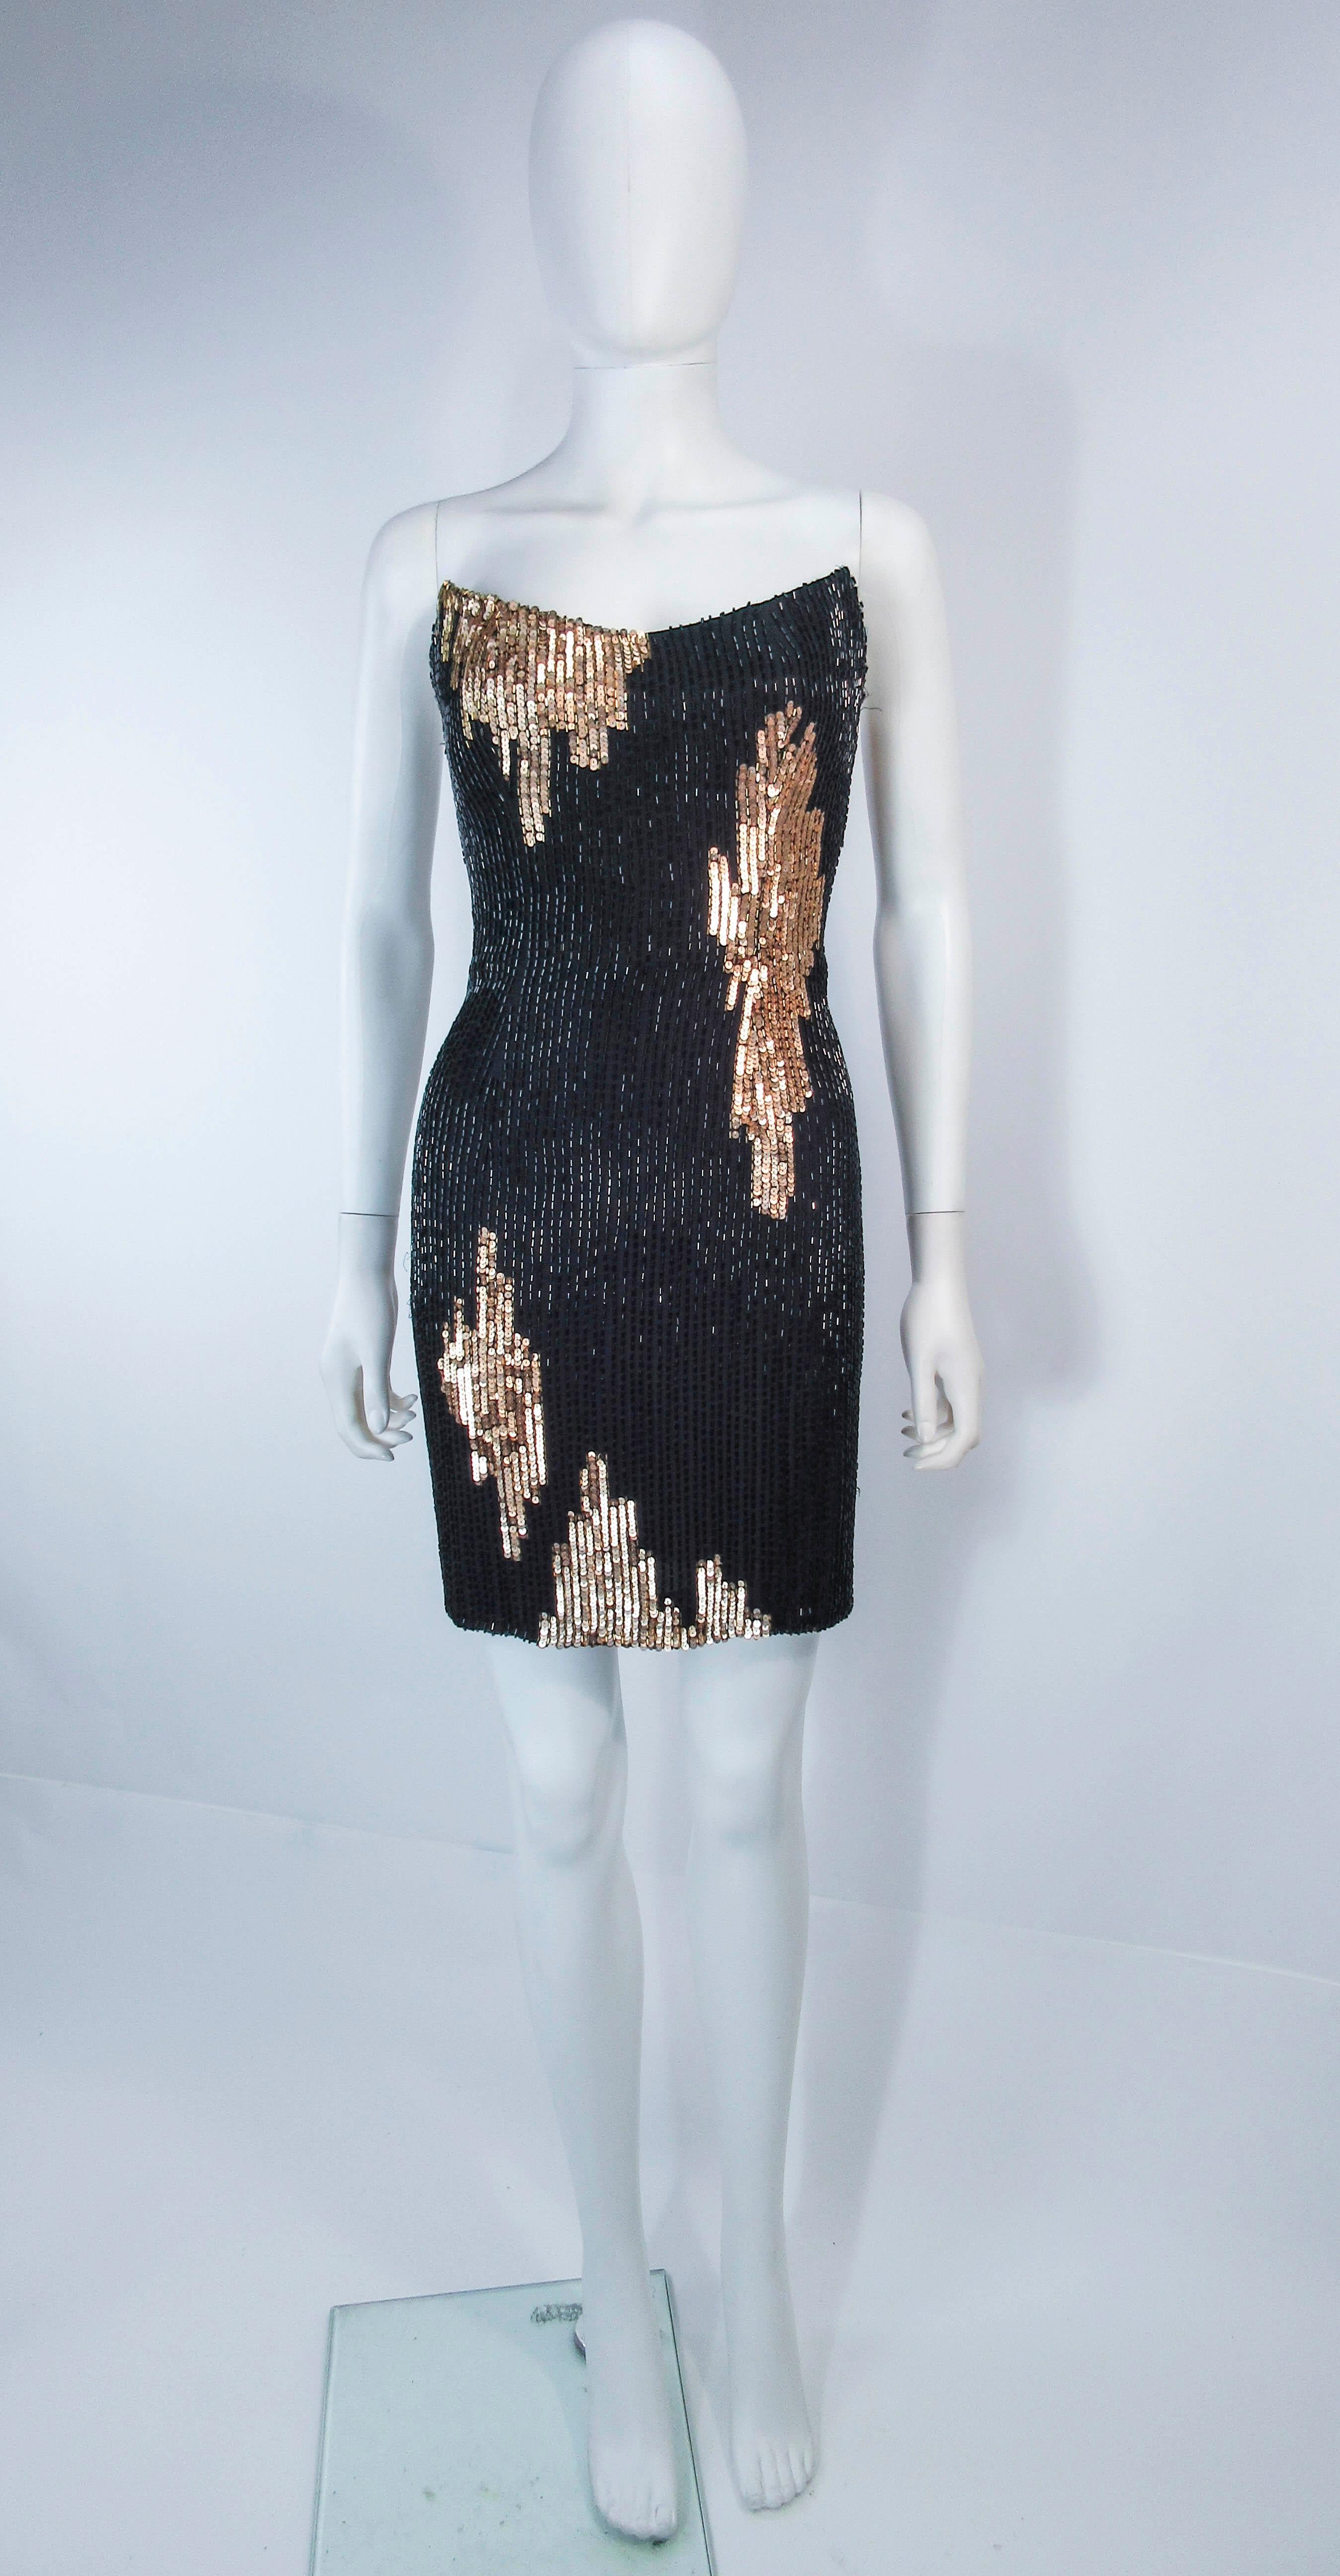 This Bob Mackie cocktail dress is composed of a black silk with black & gold beading.  Features a gorgeous darted bust line and mini length. There is a center back zipper closure. In excellent vintage condition.

**Please cross-reference